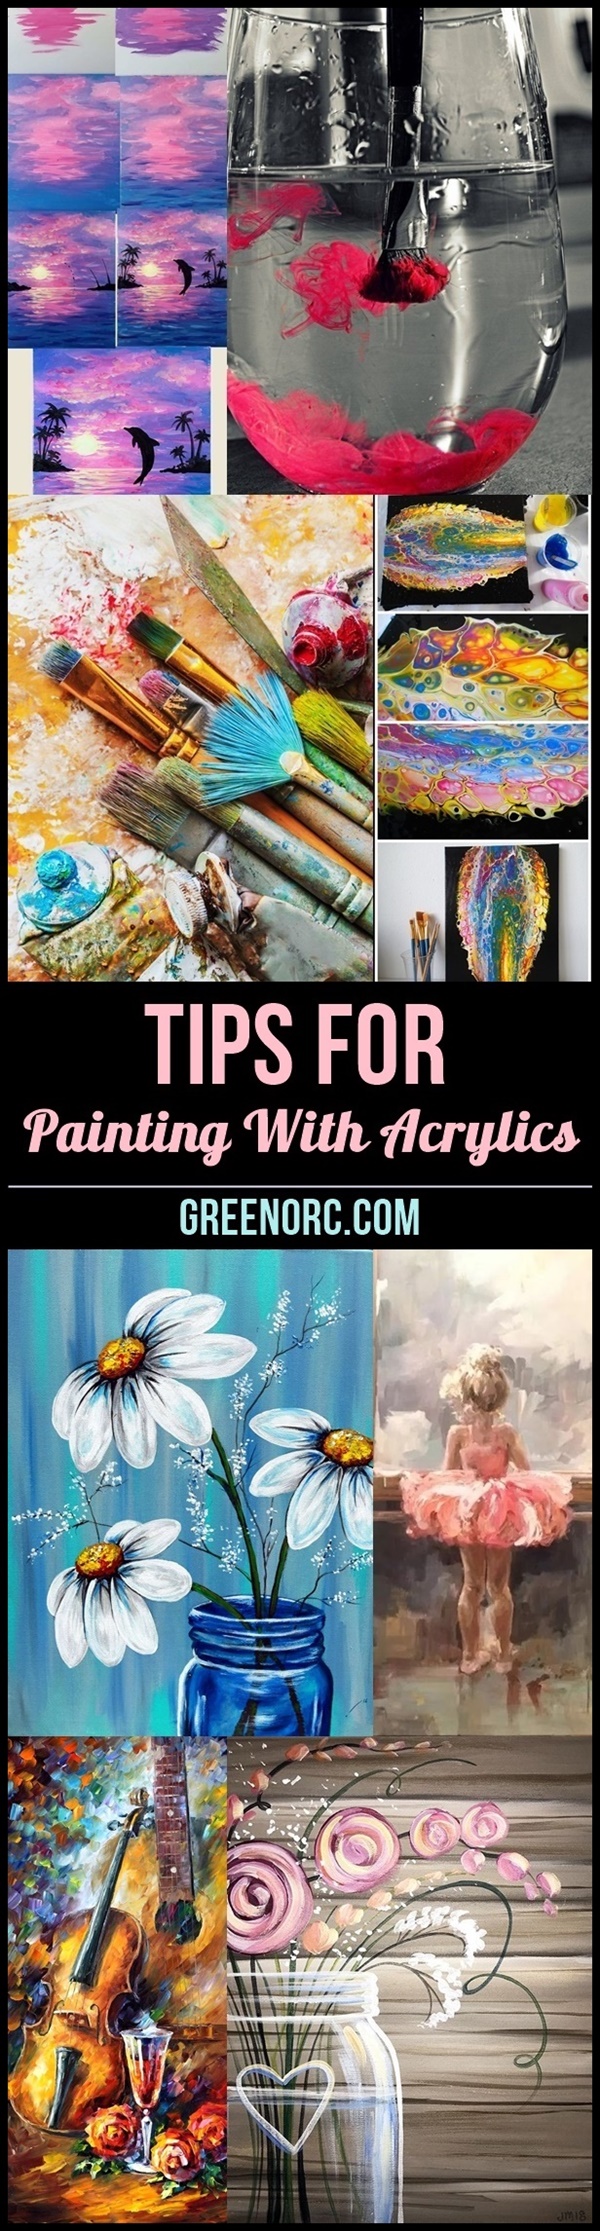 Tips For Painting With Acrylics